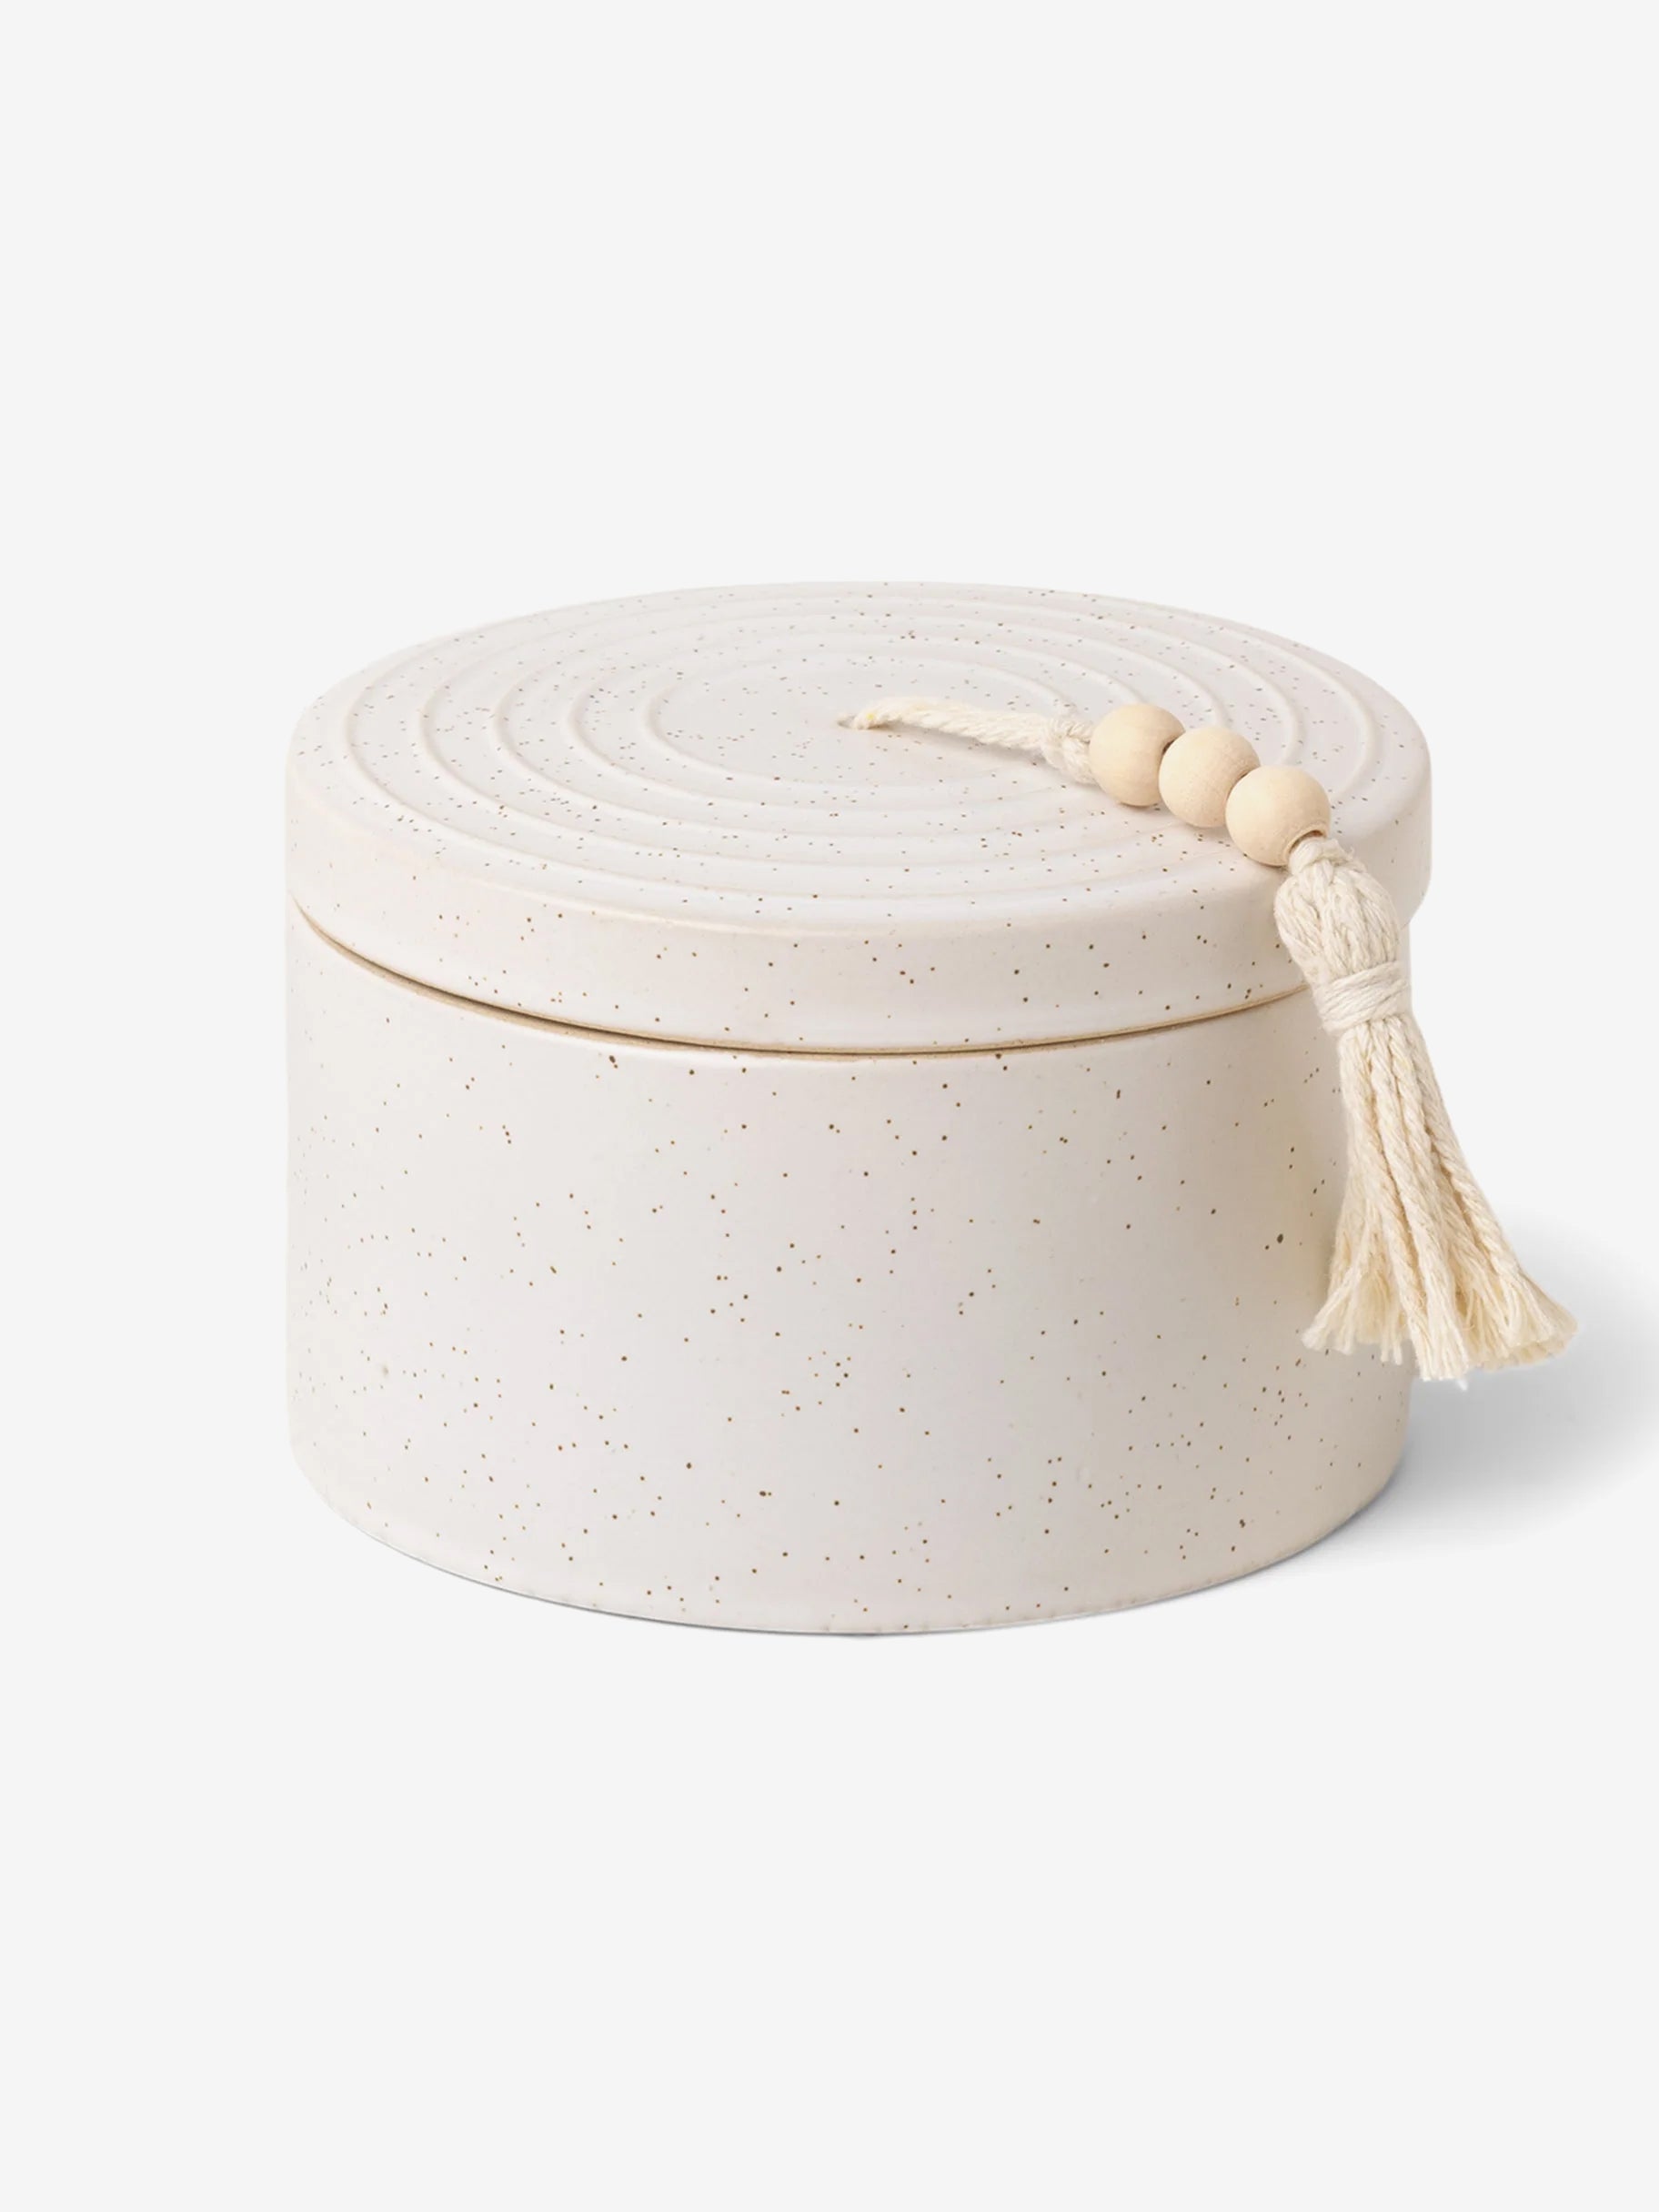 Paddywax Cypress & Fir Ceramic Candle with Lid - White Speckled